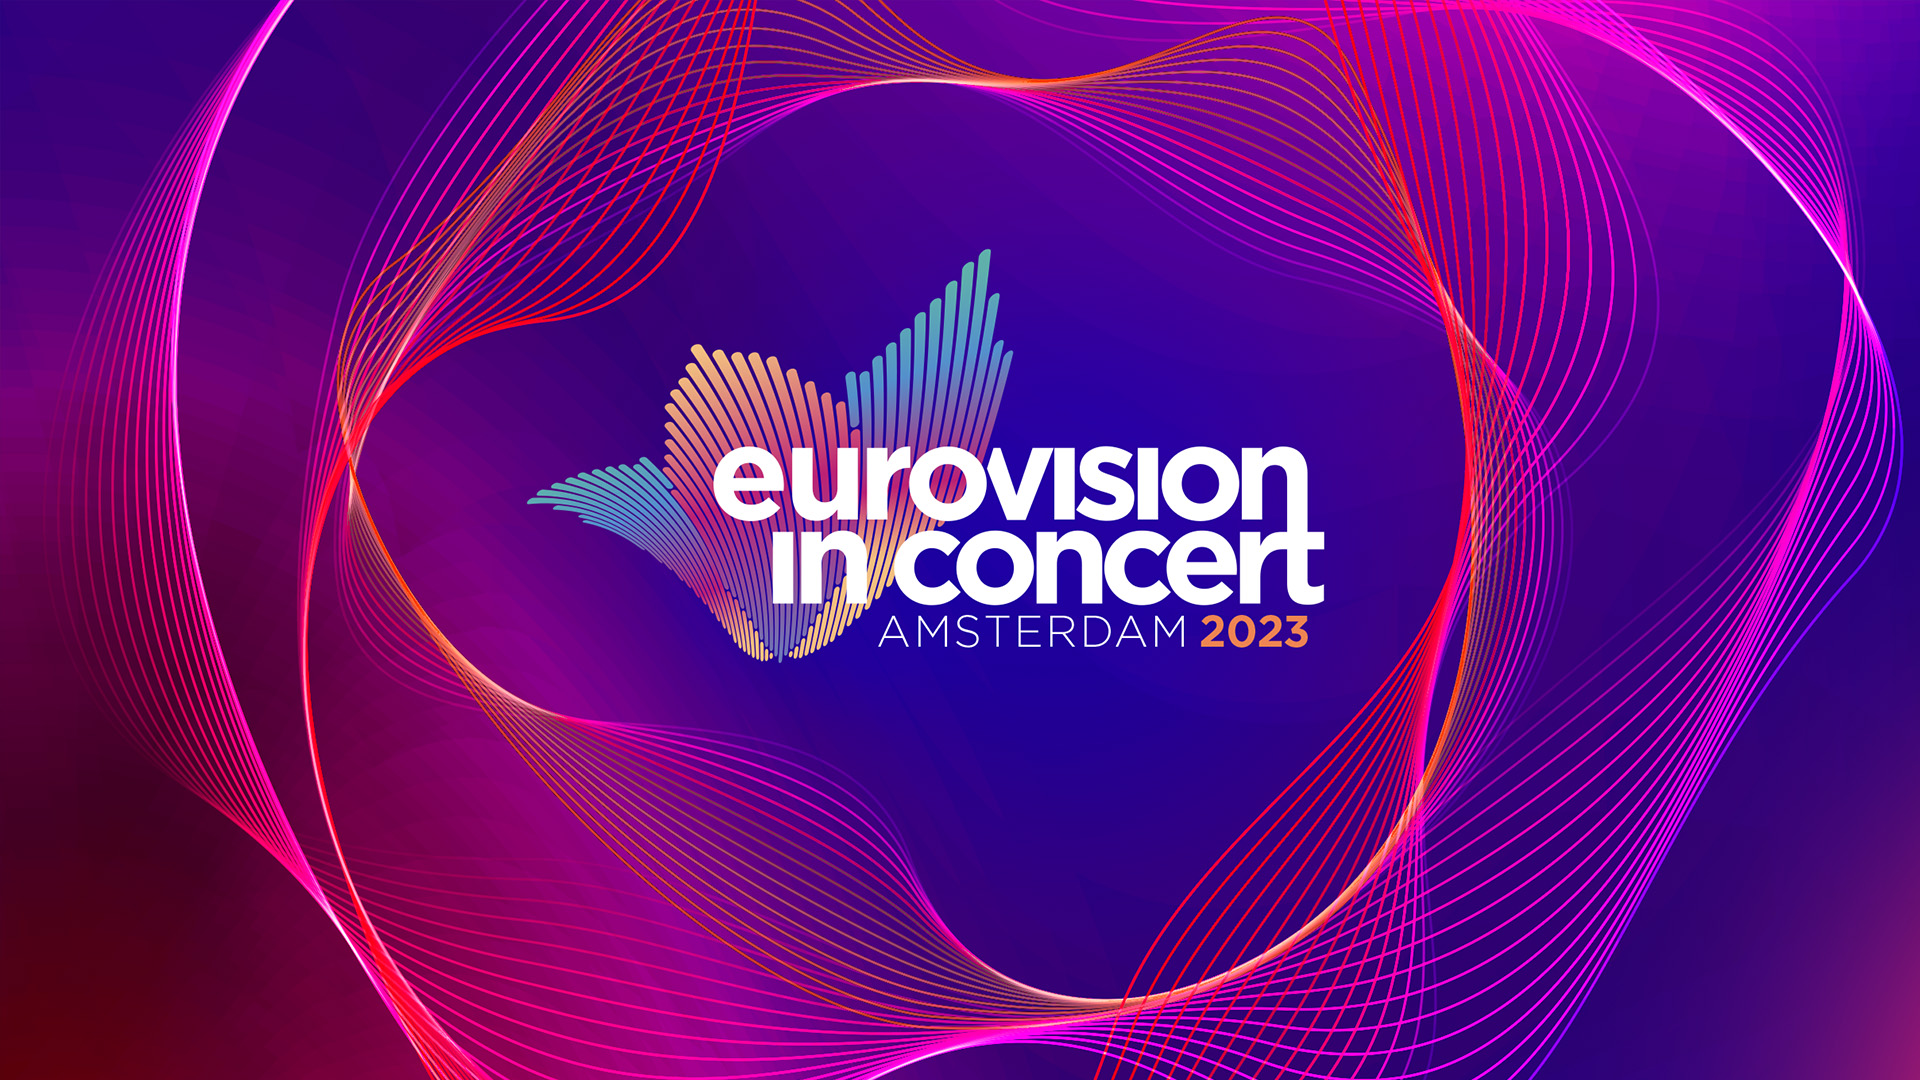 [UPDATED] Eurovision 2023: 23 (of 37) Countries confirmed for Eurovision in Concert 2023, and 1 special act